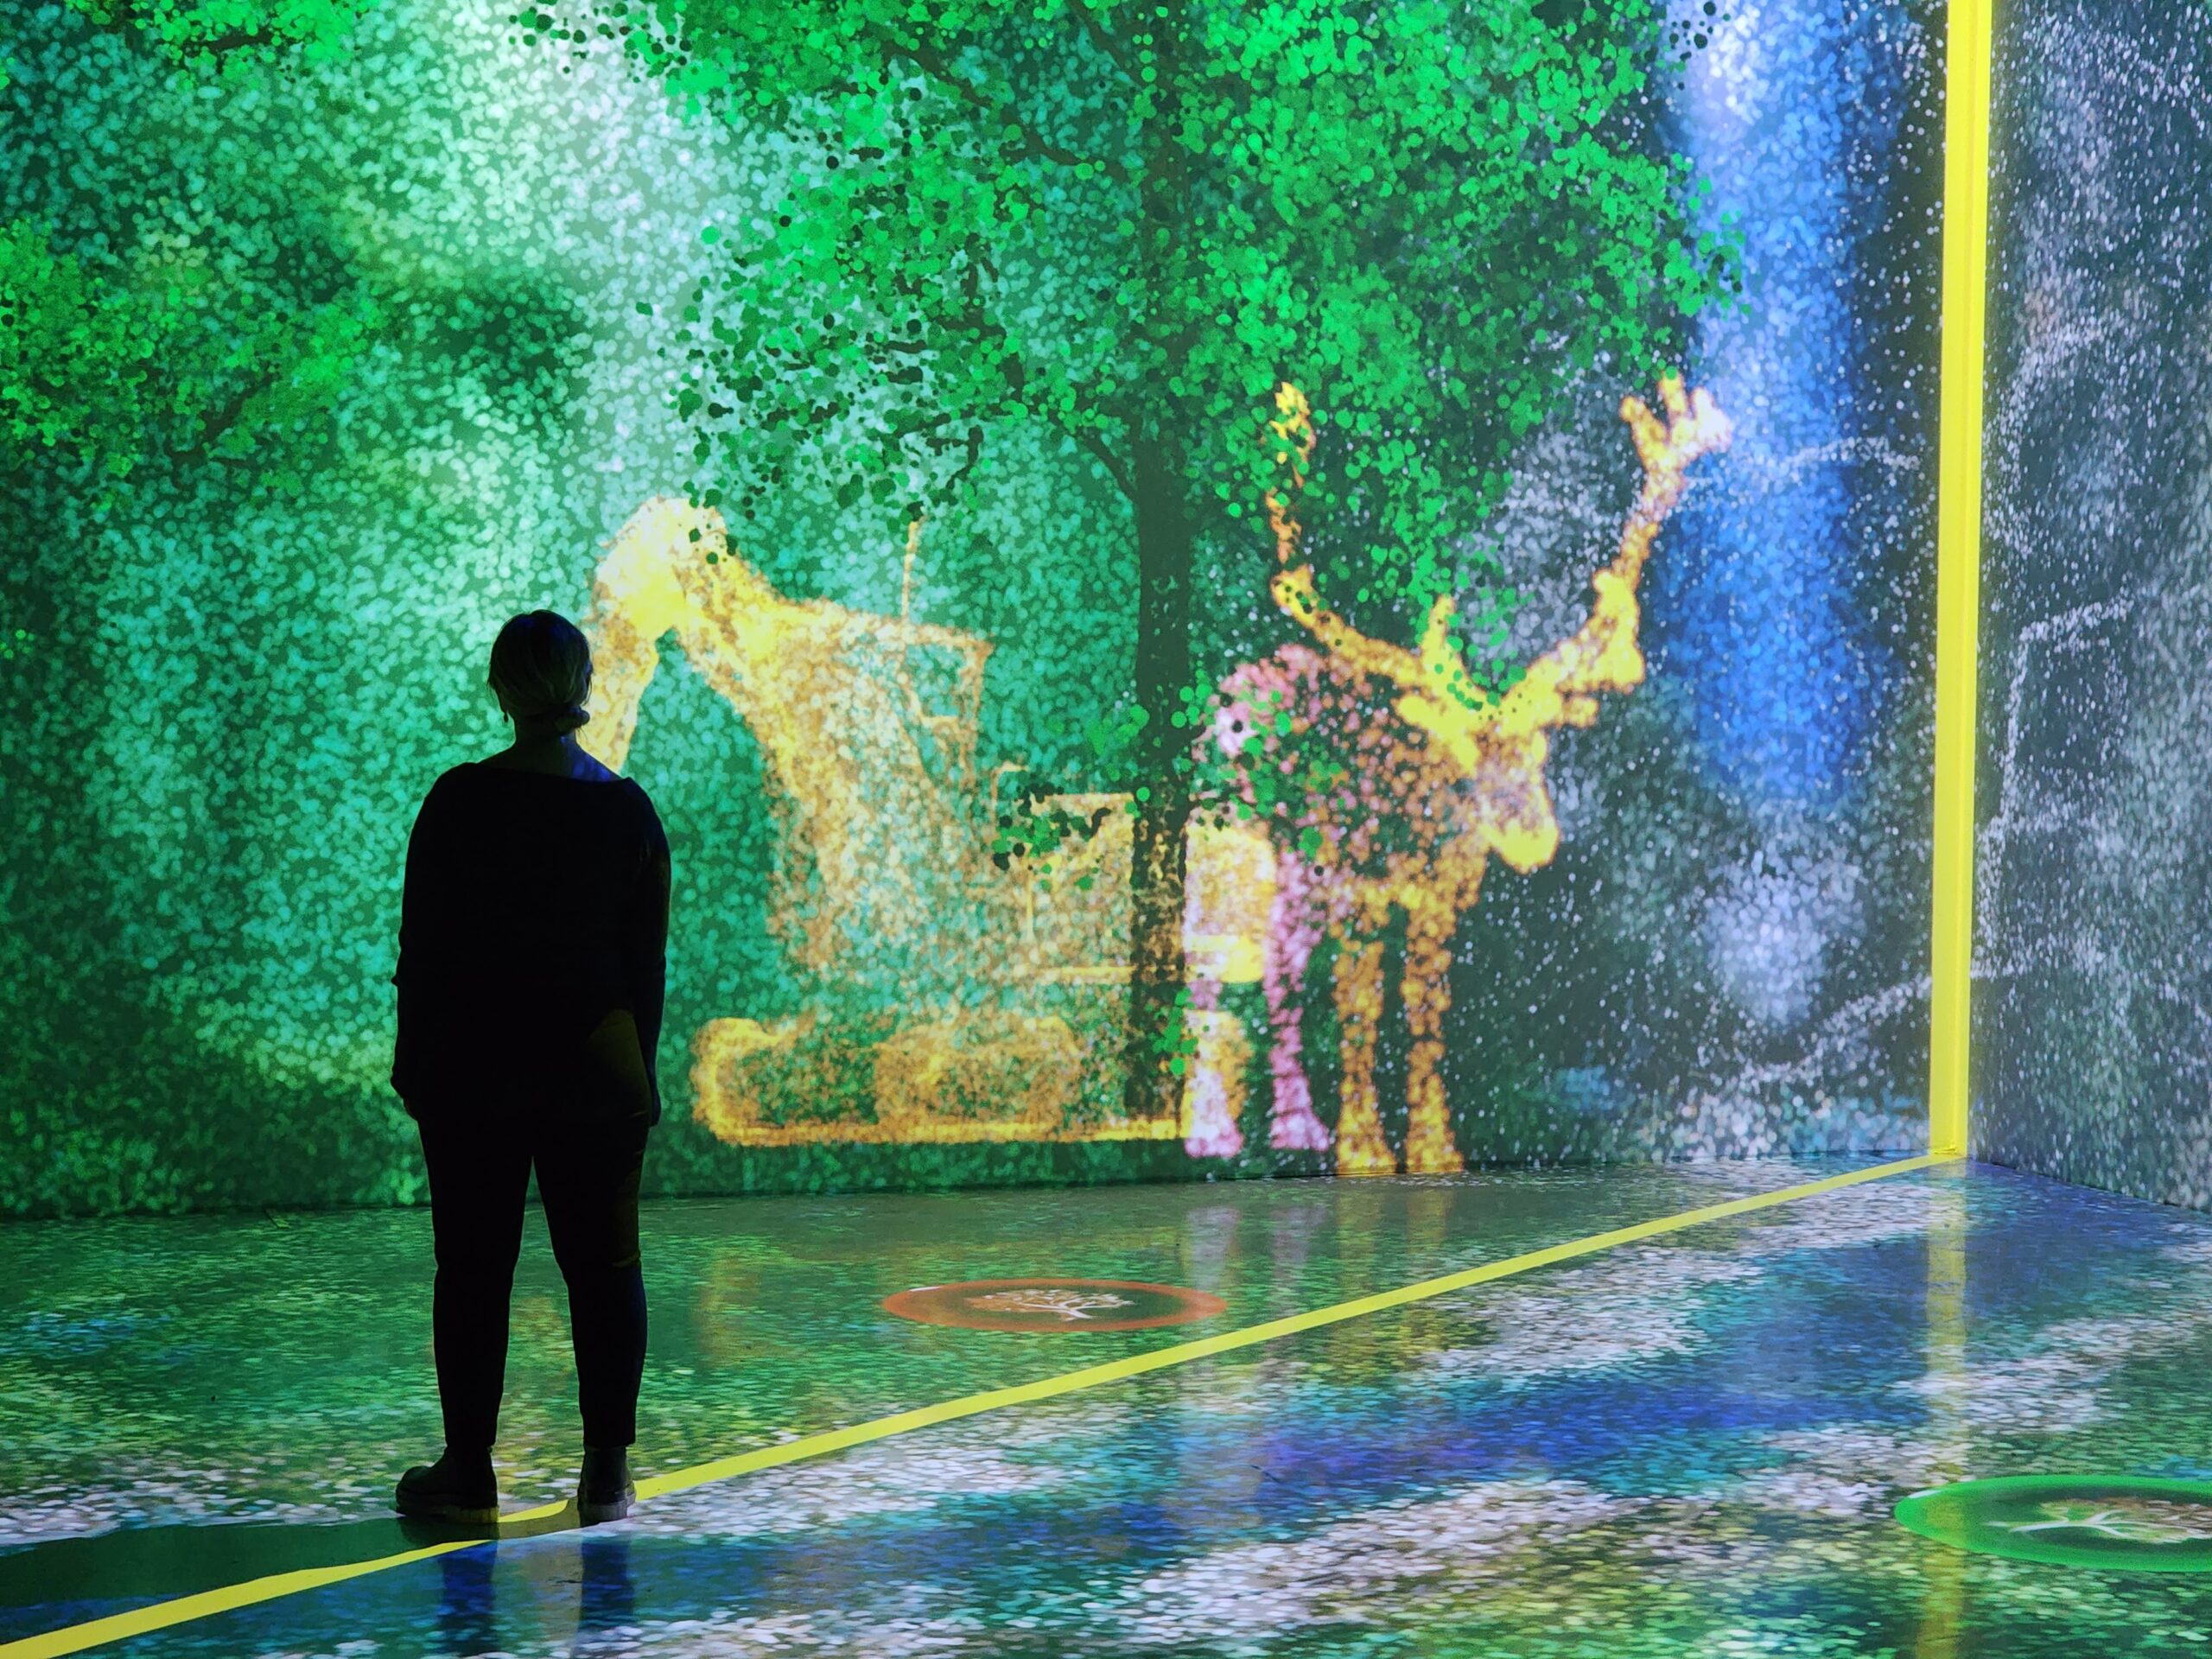 Silhouette of a person in the Arcadia Earth immersive exhibit, with digital forests and animals projected on the walls